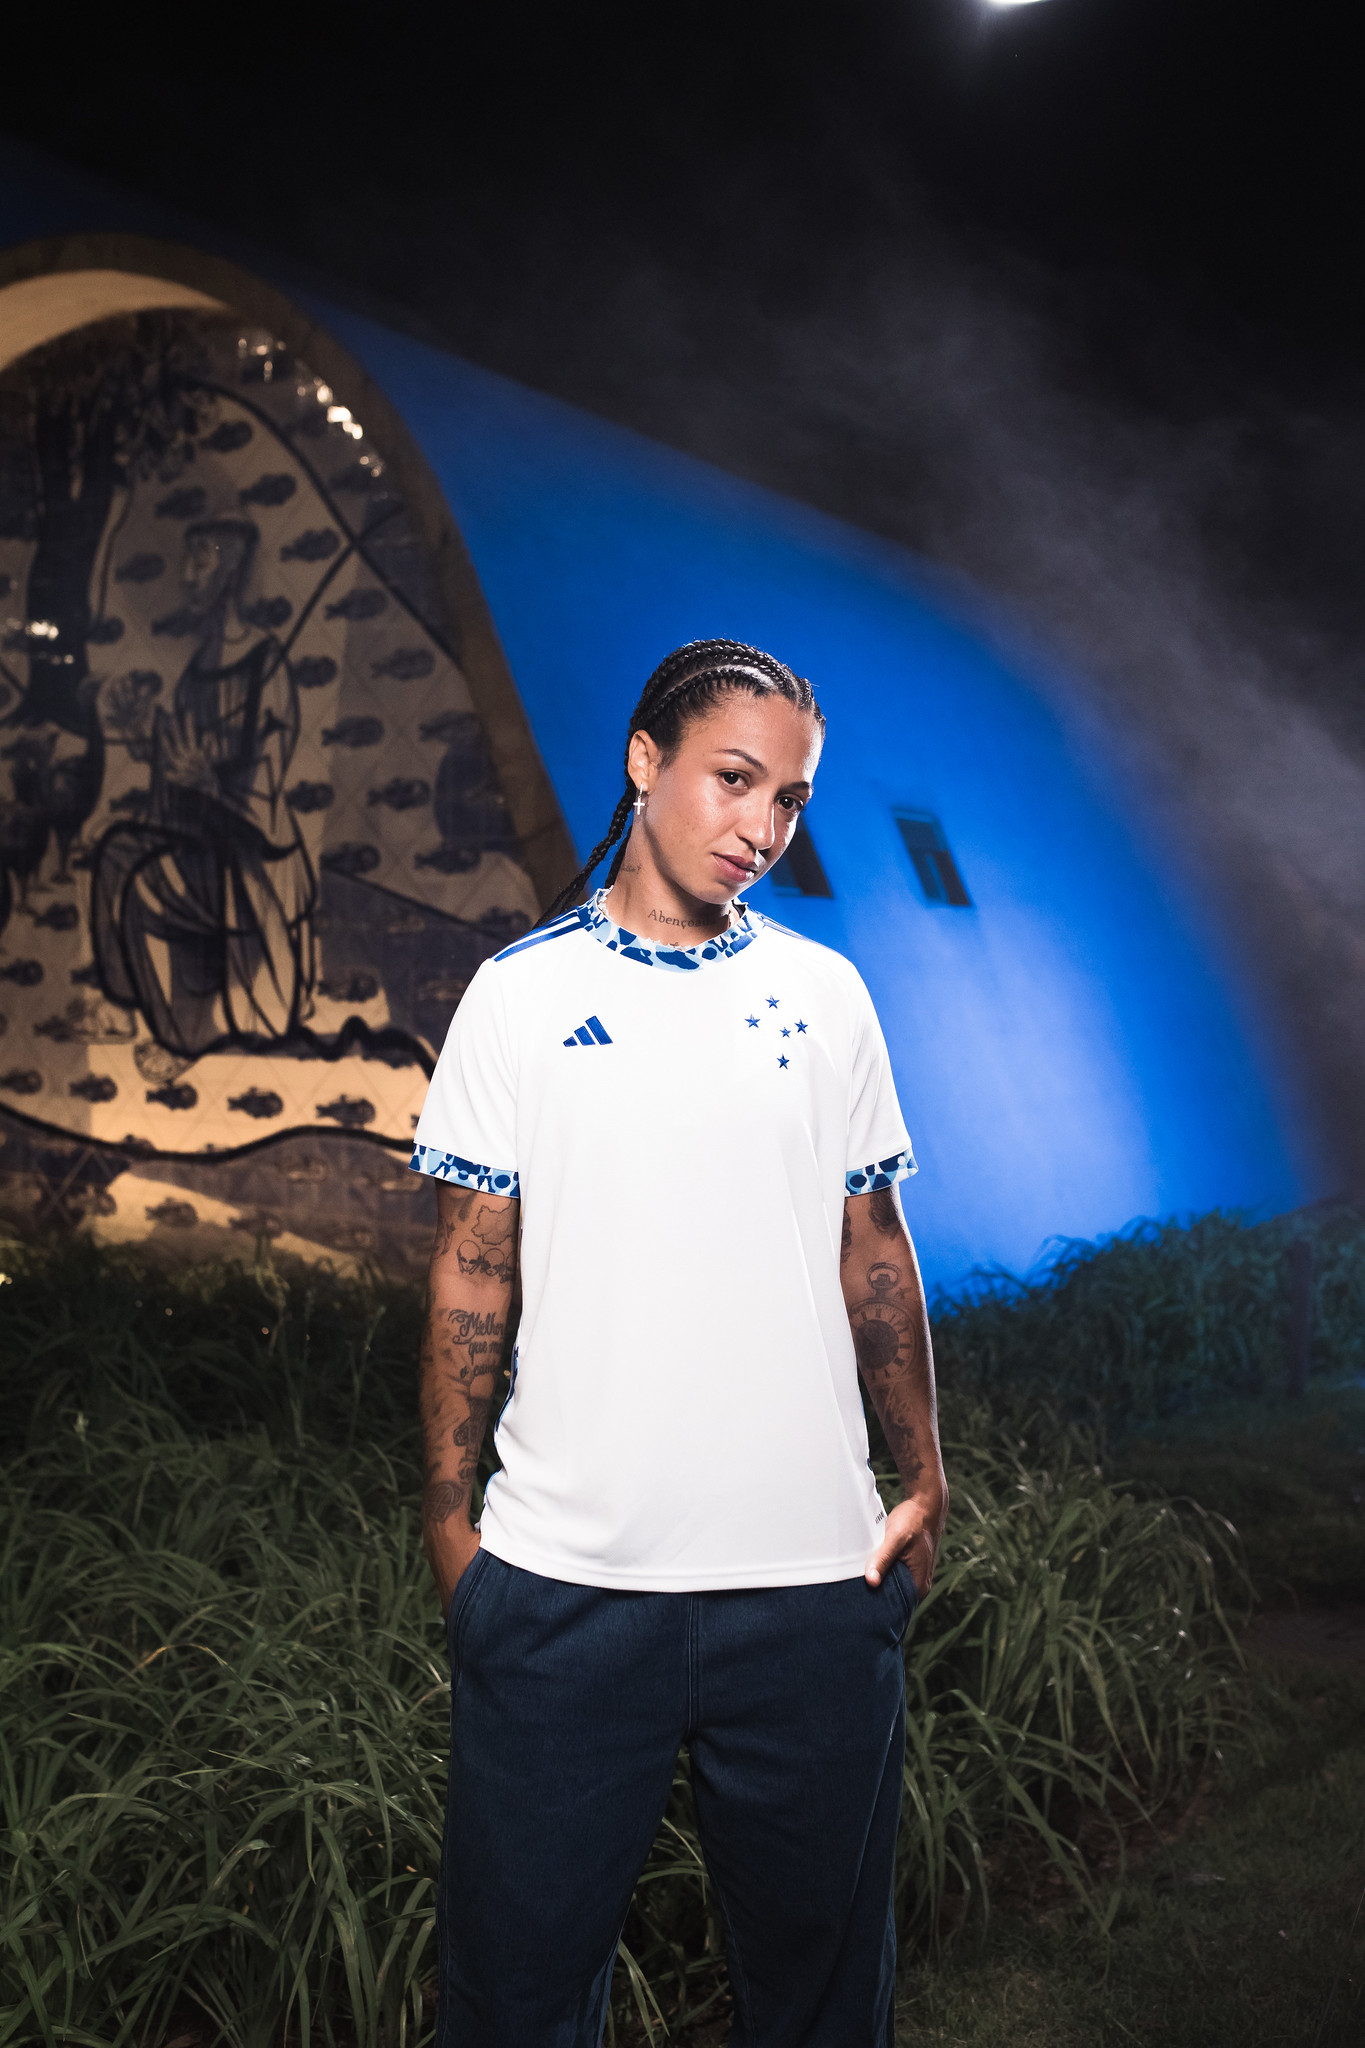 Cruzeiro posted a photo session with the new shirt